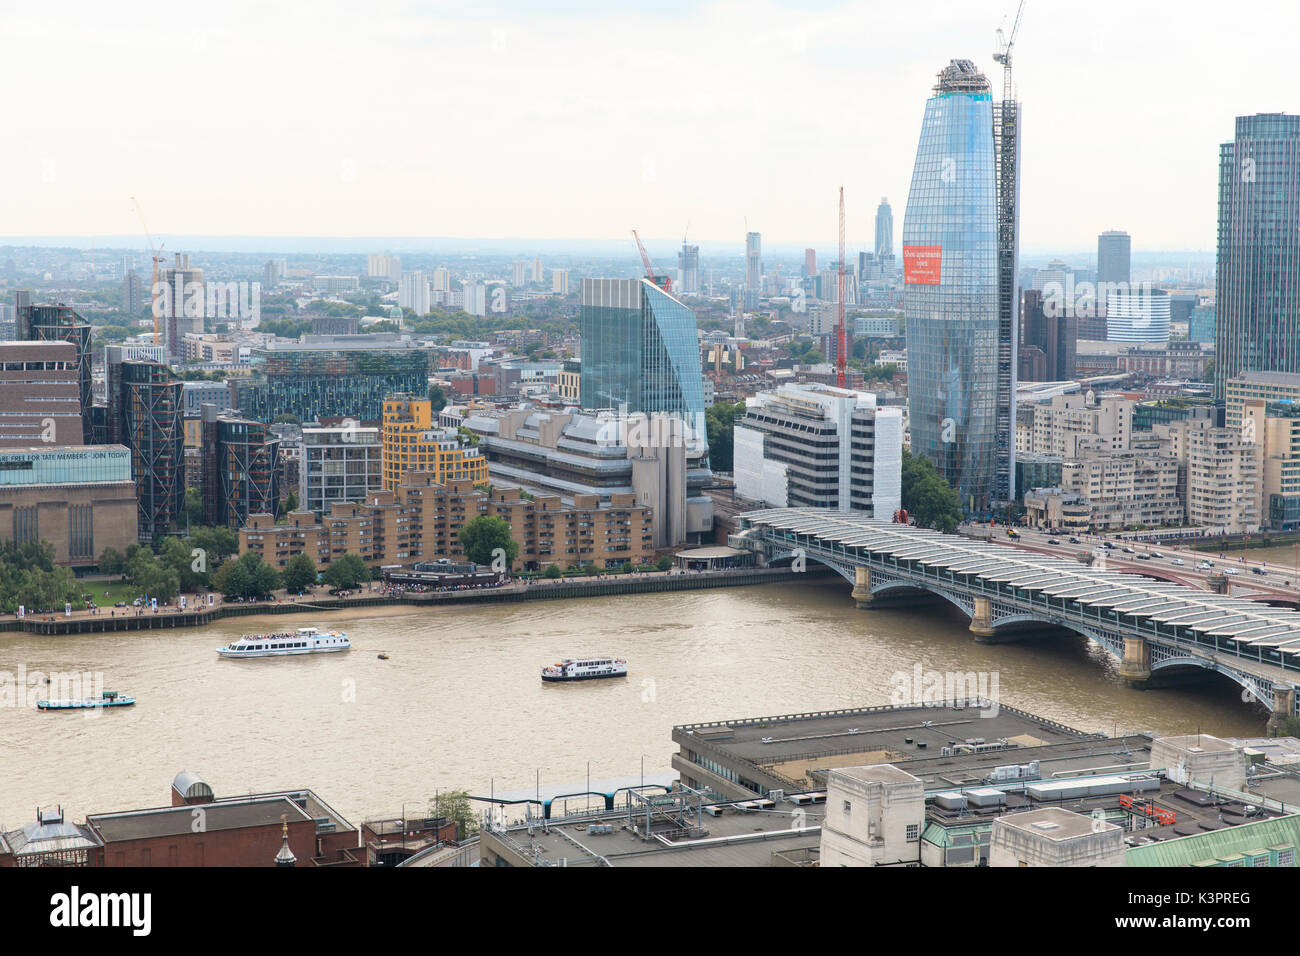 View of Blackfriars Bridge & One Blackfriars from St. Paul's Cathedral. Stock Photo